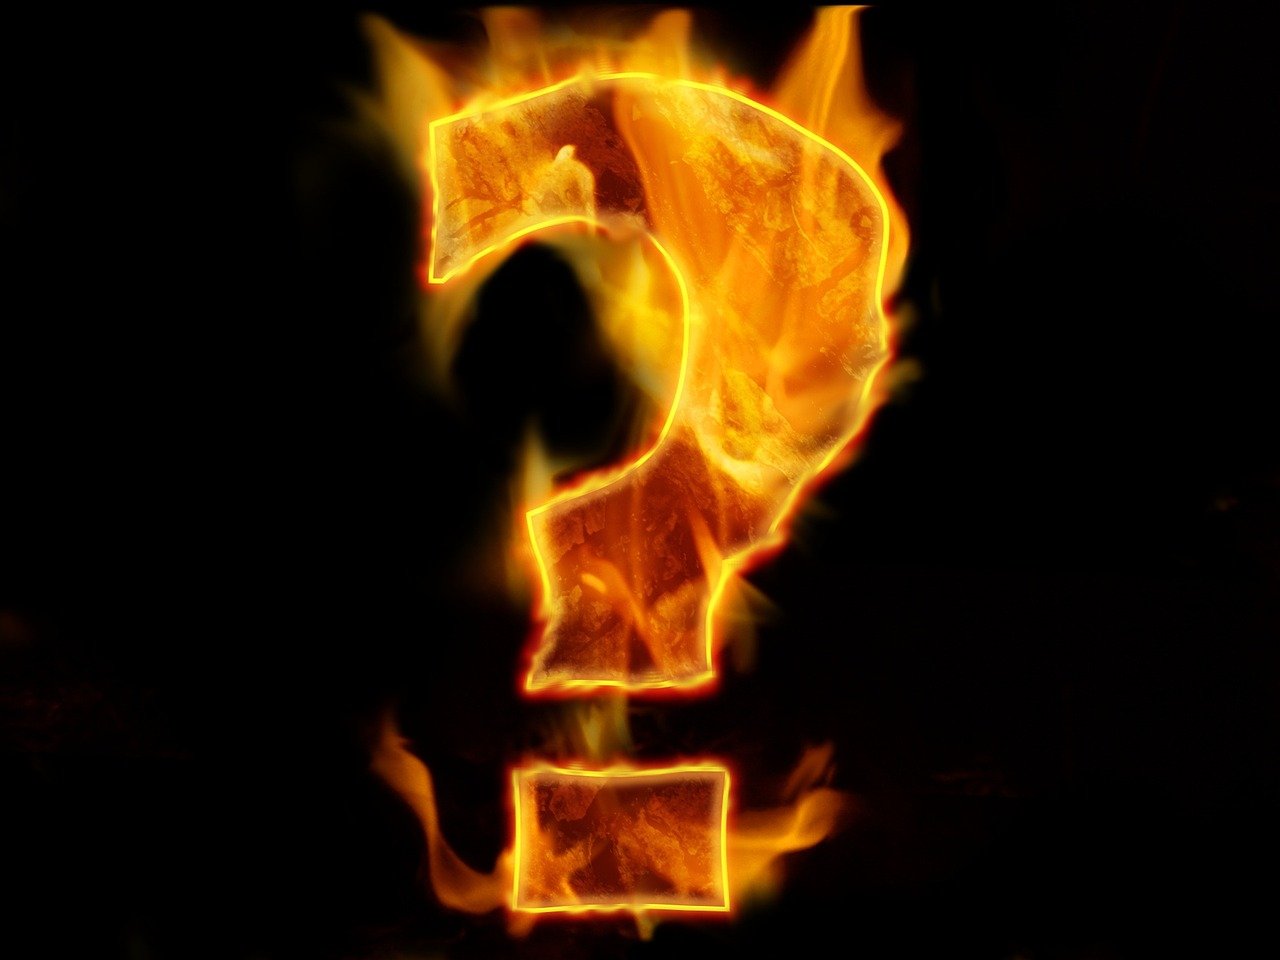 a burning question mark on a black background, a picture, an orange fire in the background, !!!!!!!!!!!!!!!!!!!!!!!!!, discovered photo